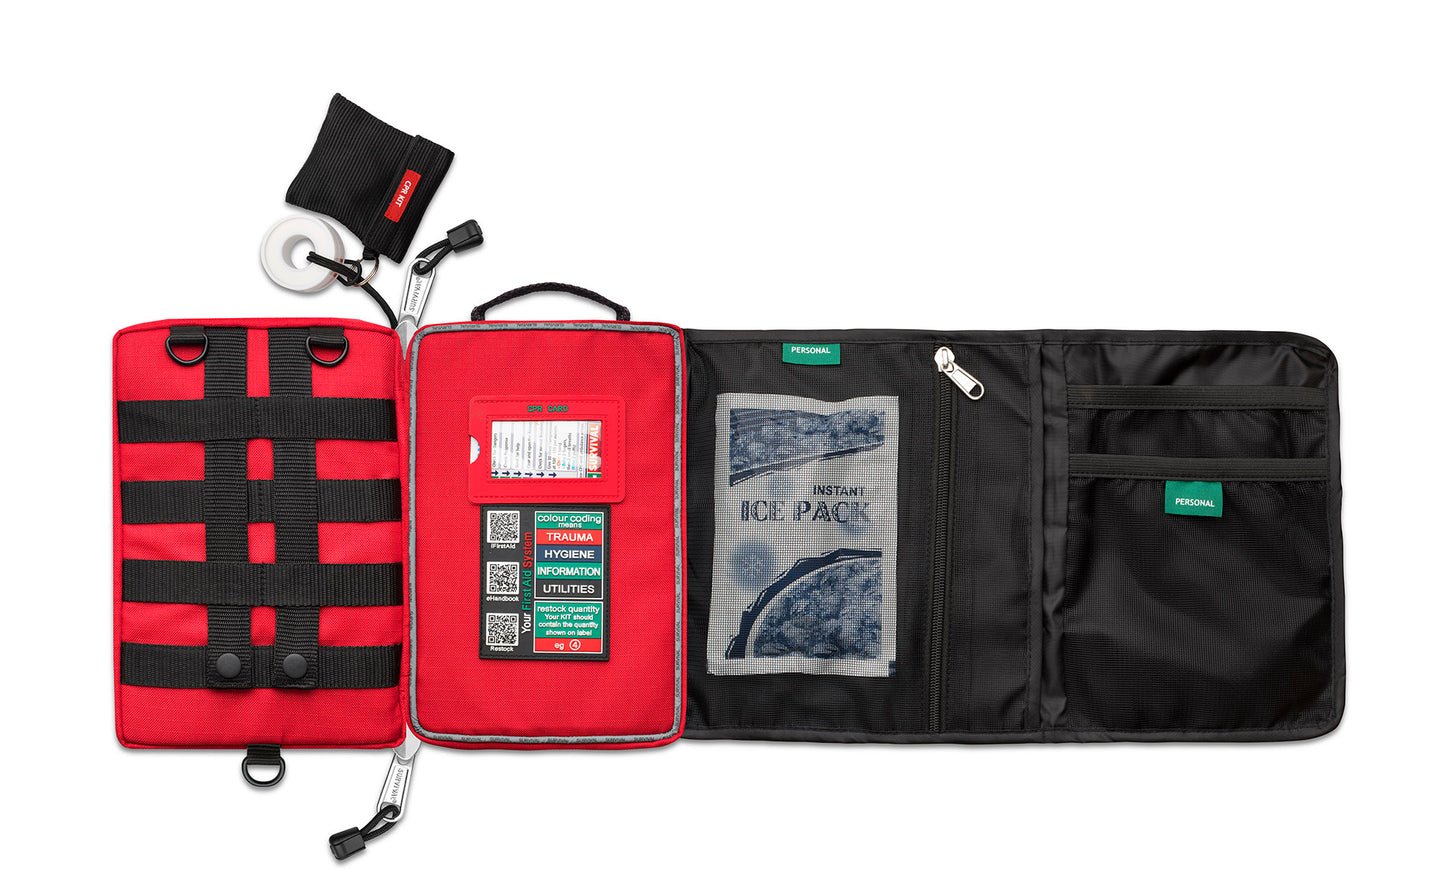 SURVIVAL Workplace First Aid Kit